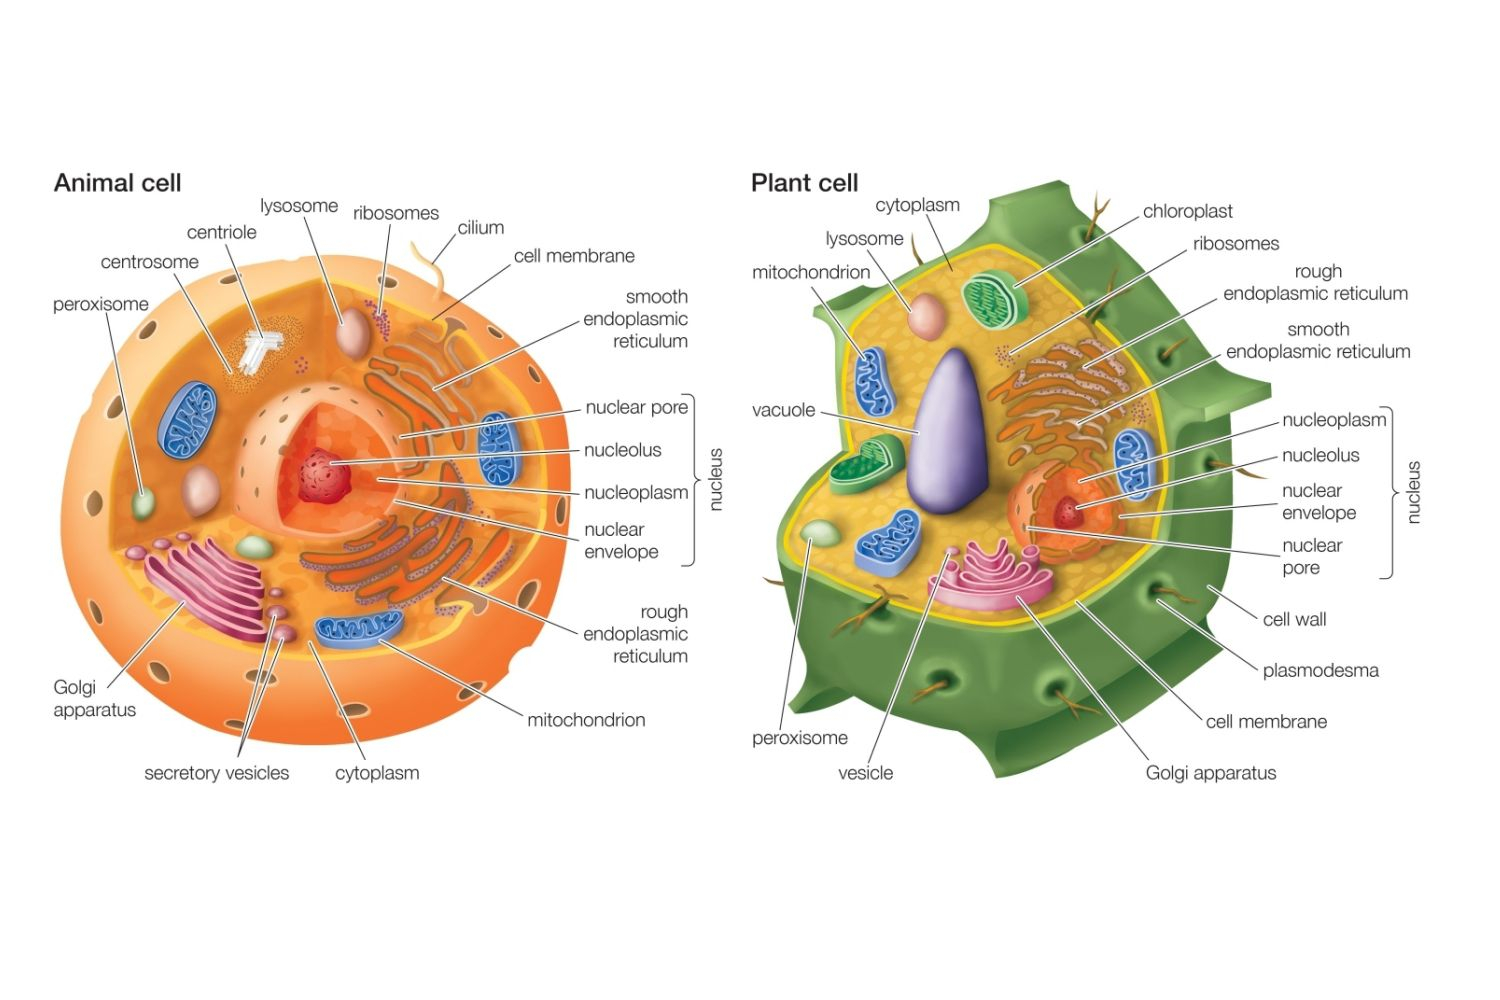 Plant And Animal Cell Diagram Differences Between Plant And Animal Cells